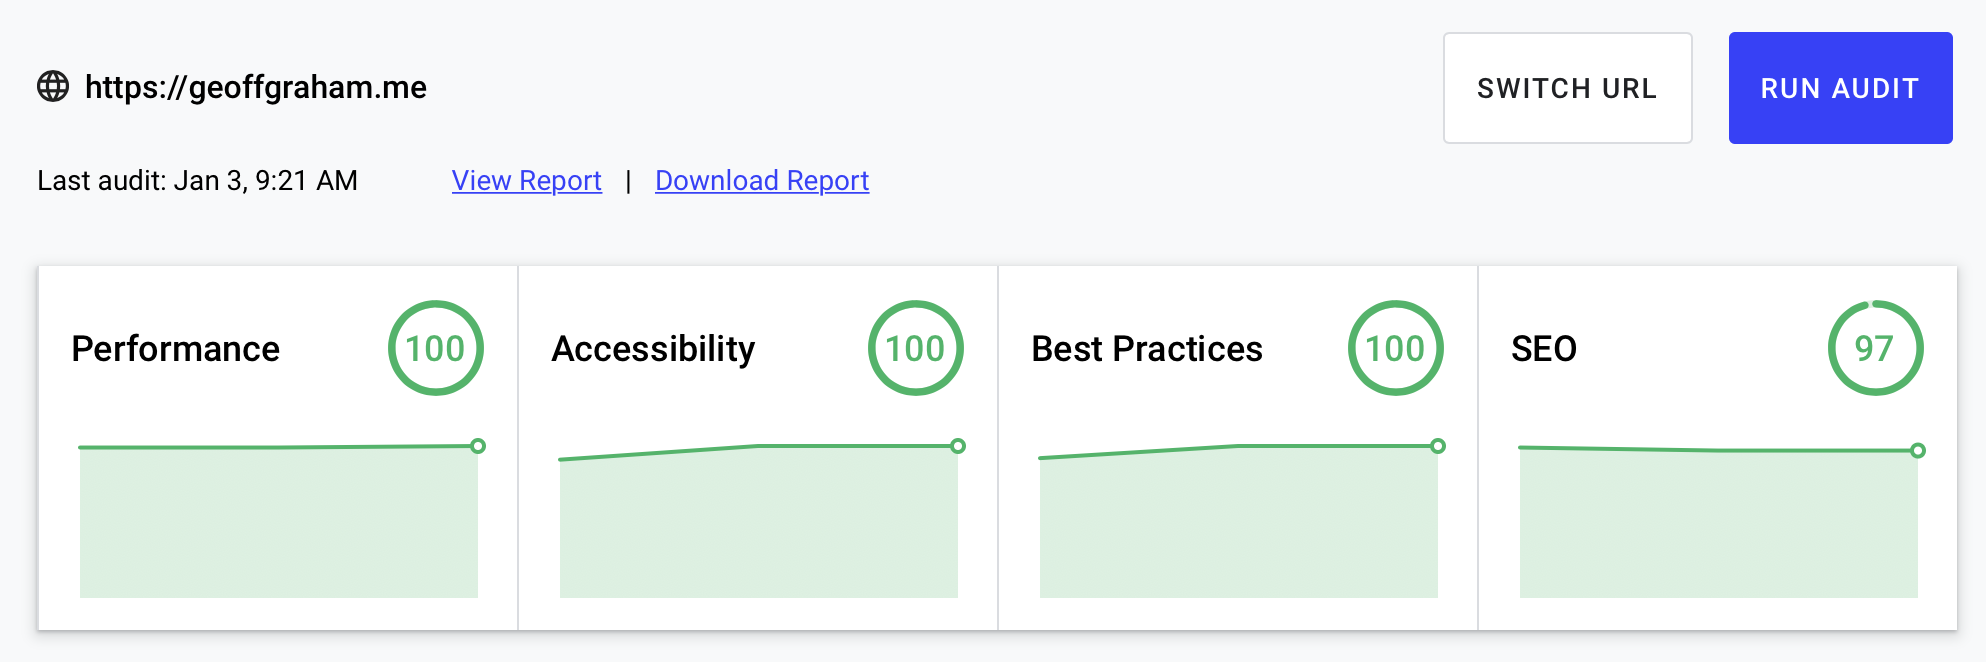 Lighthouse results showing an accessibility score of 100.